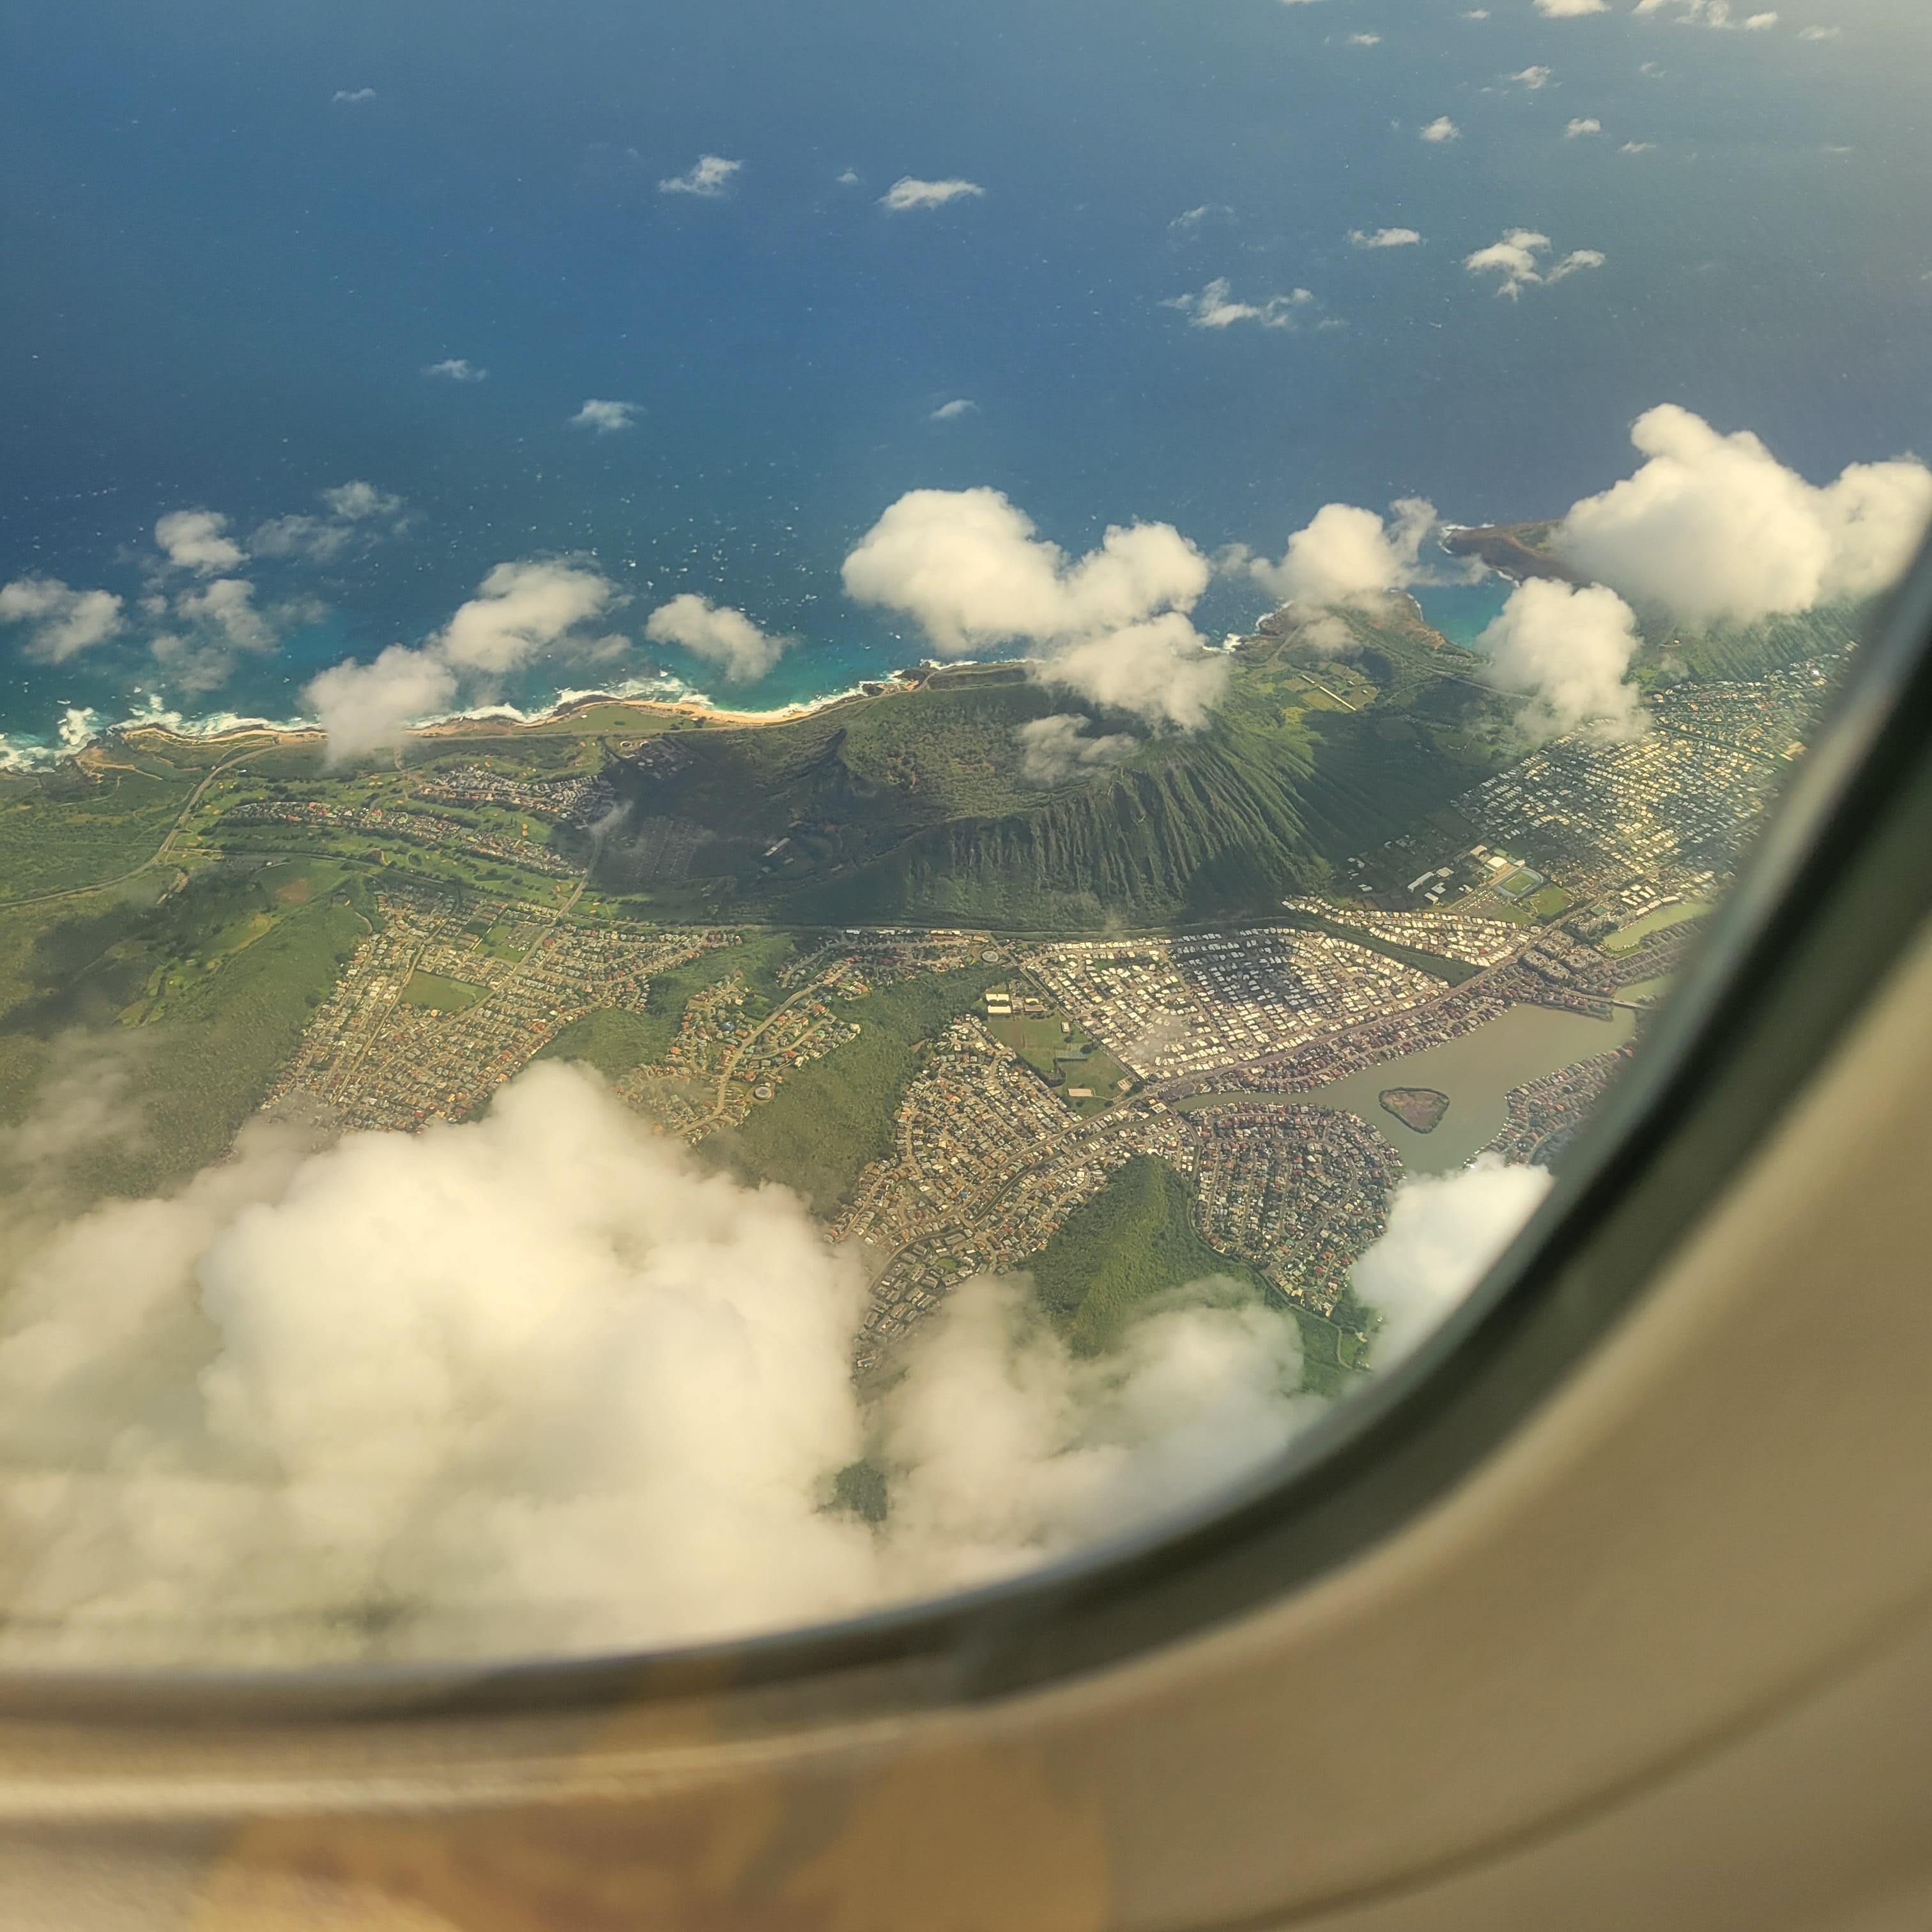 Views from the Flight into Hawaii